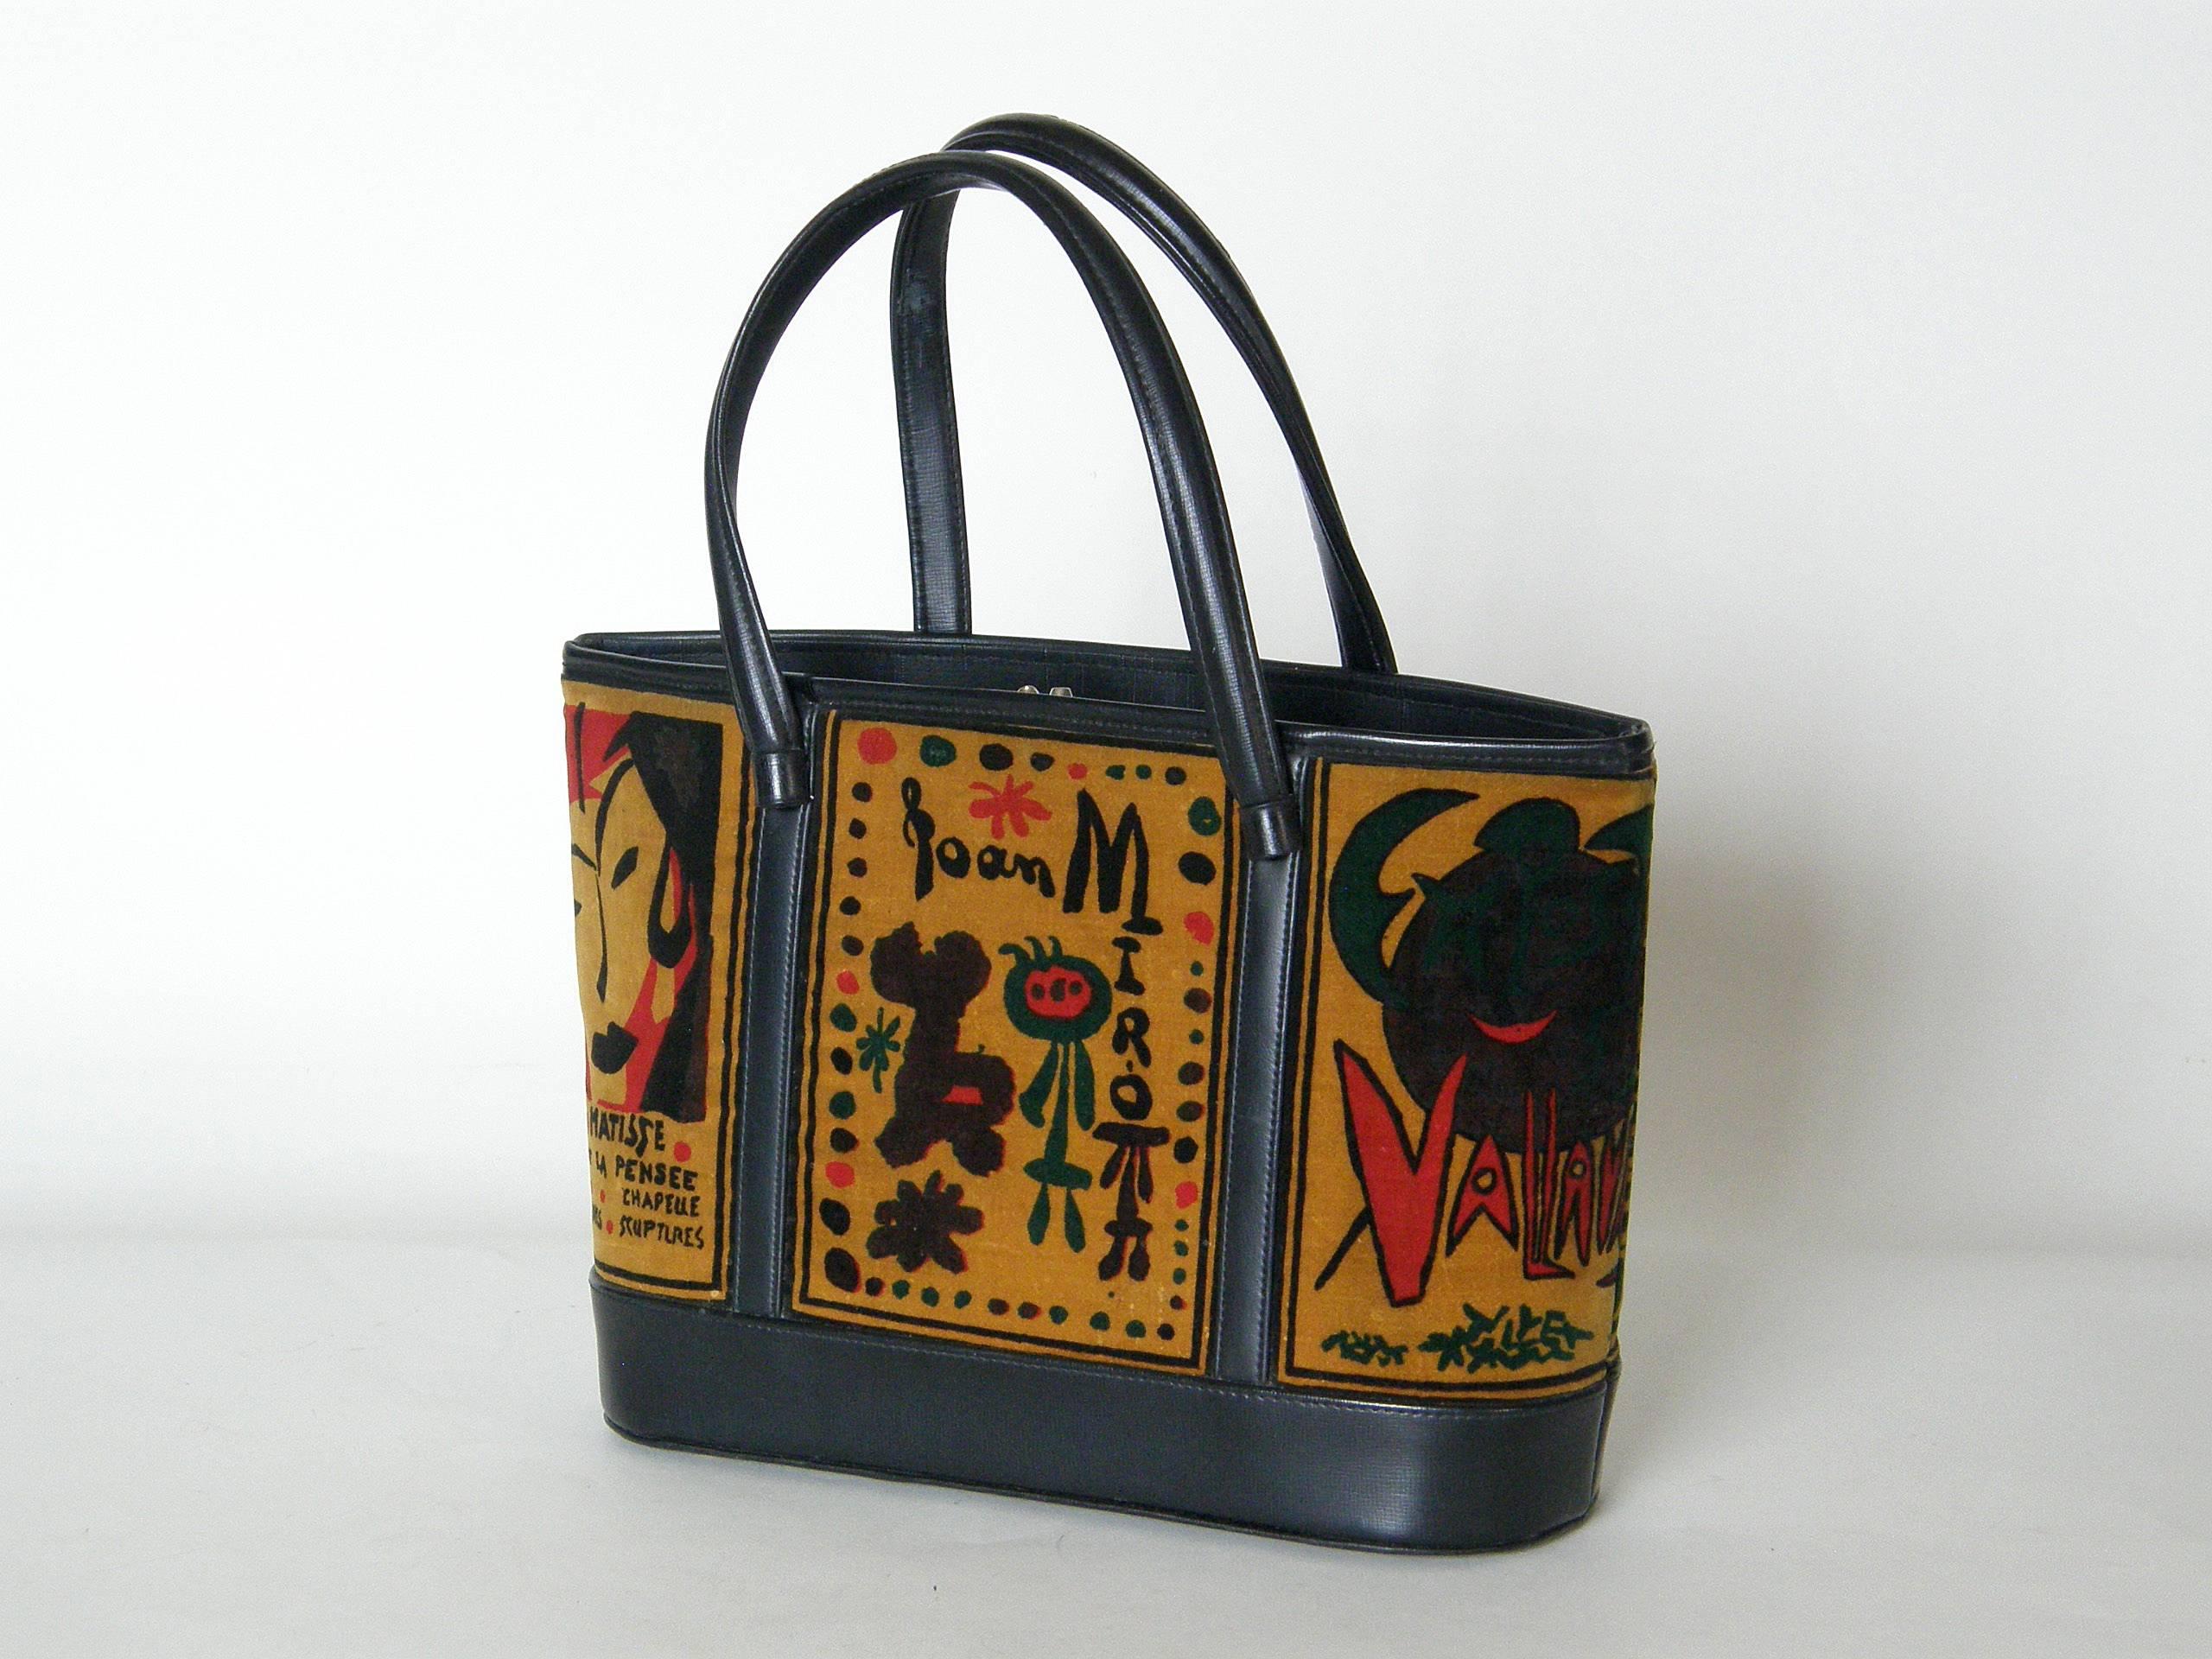 This tote style handbag has a black vinyl body with novelty fabric insets. The unusual velveteen fabric is printed with exhibition posters promoting the work of famous modern artists of the early to mid-20th century, such as Pablo Picasso, Henri